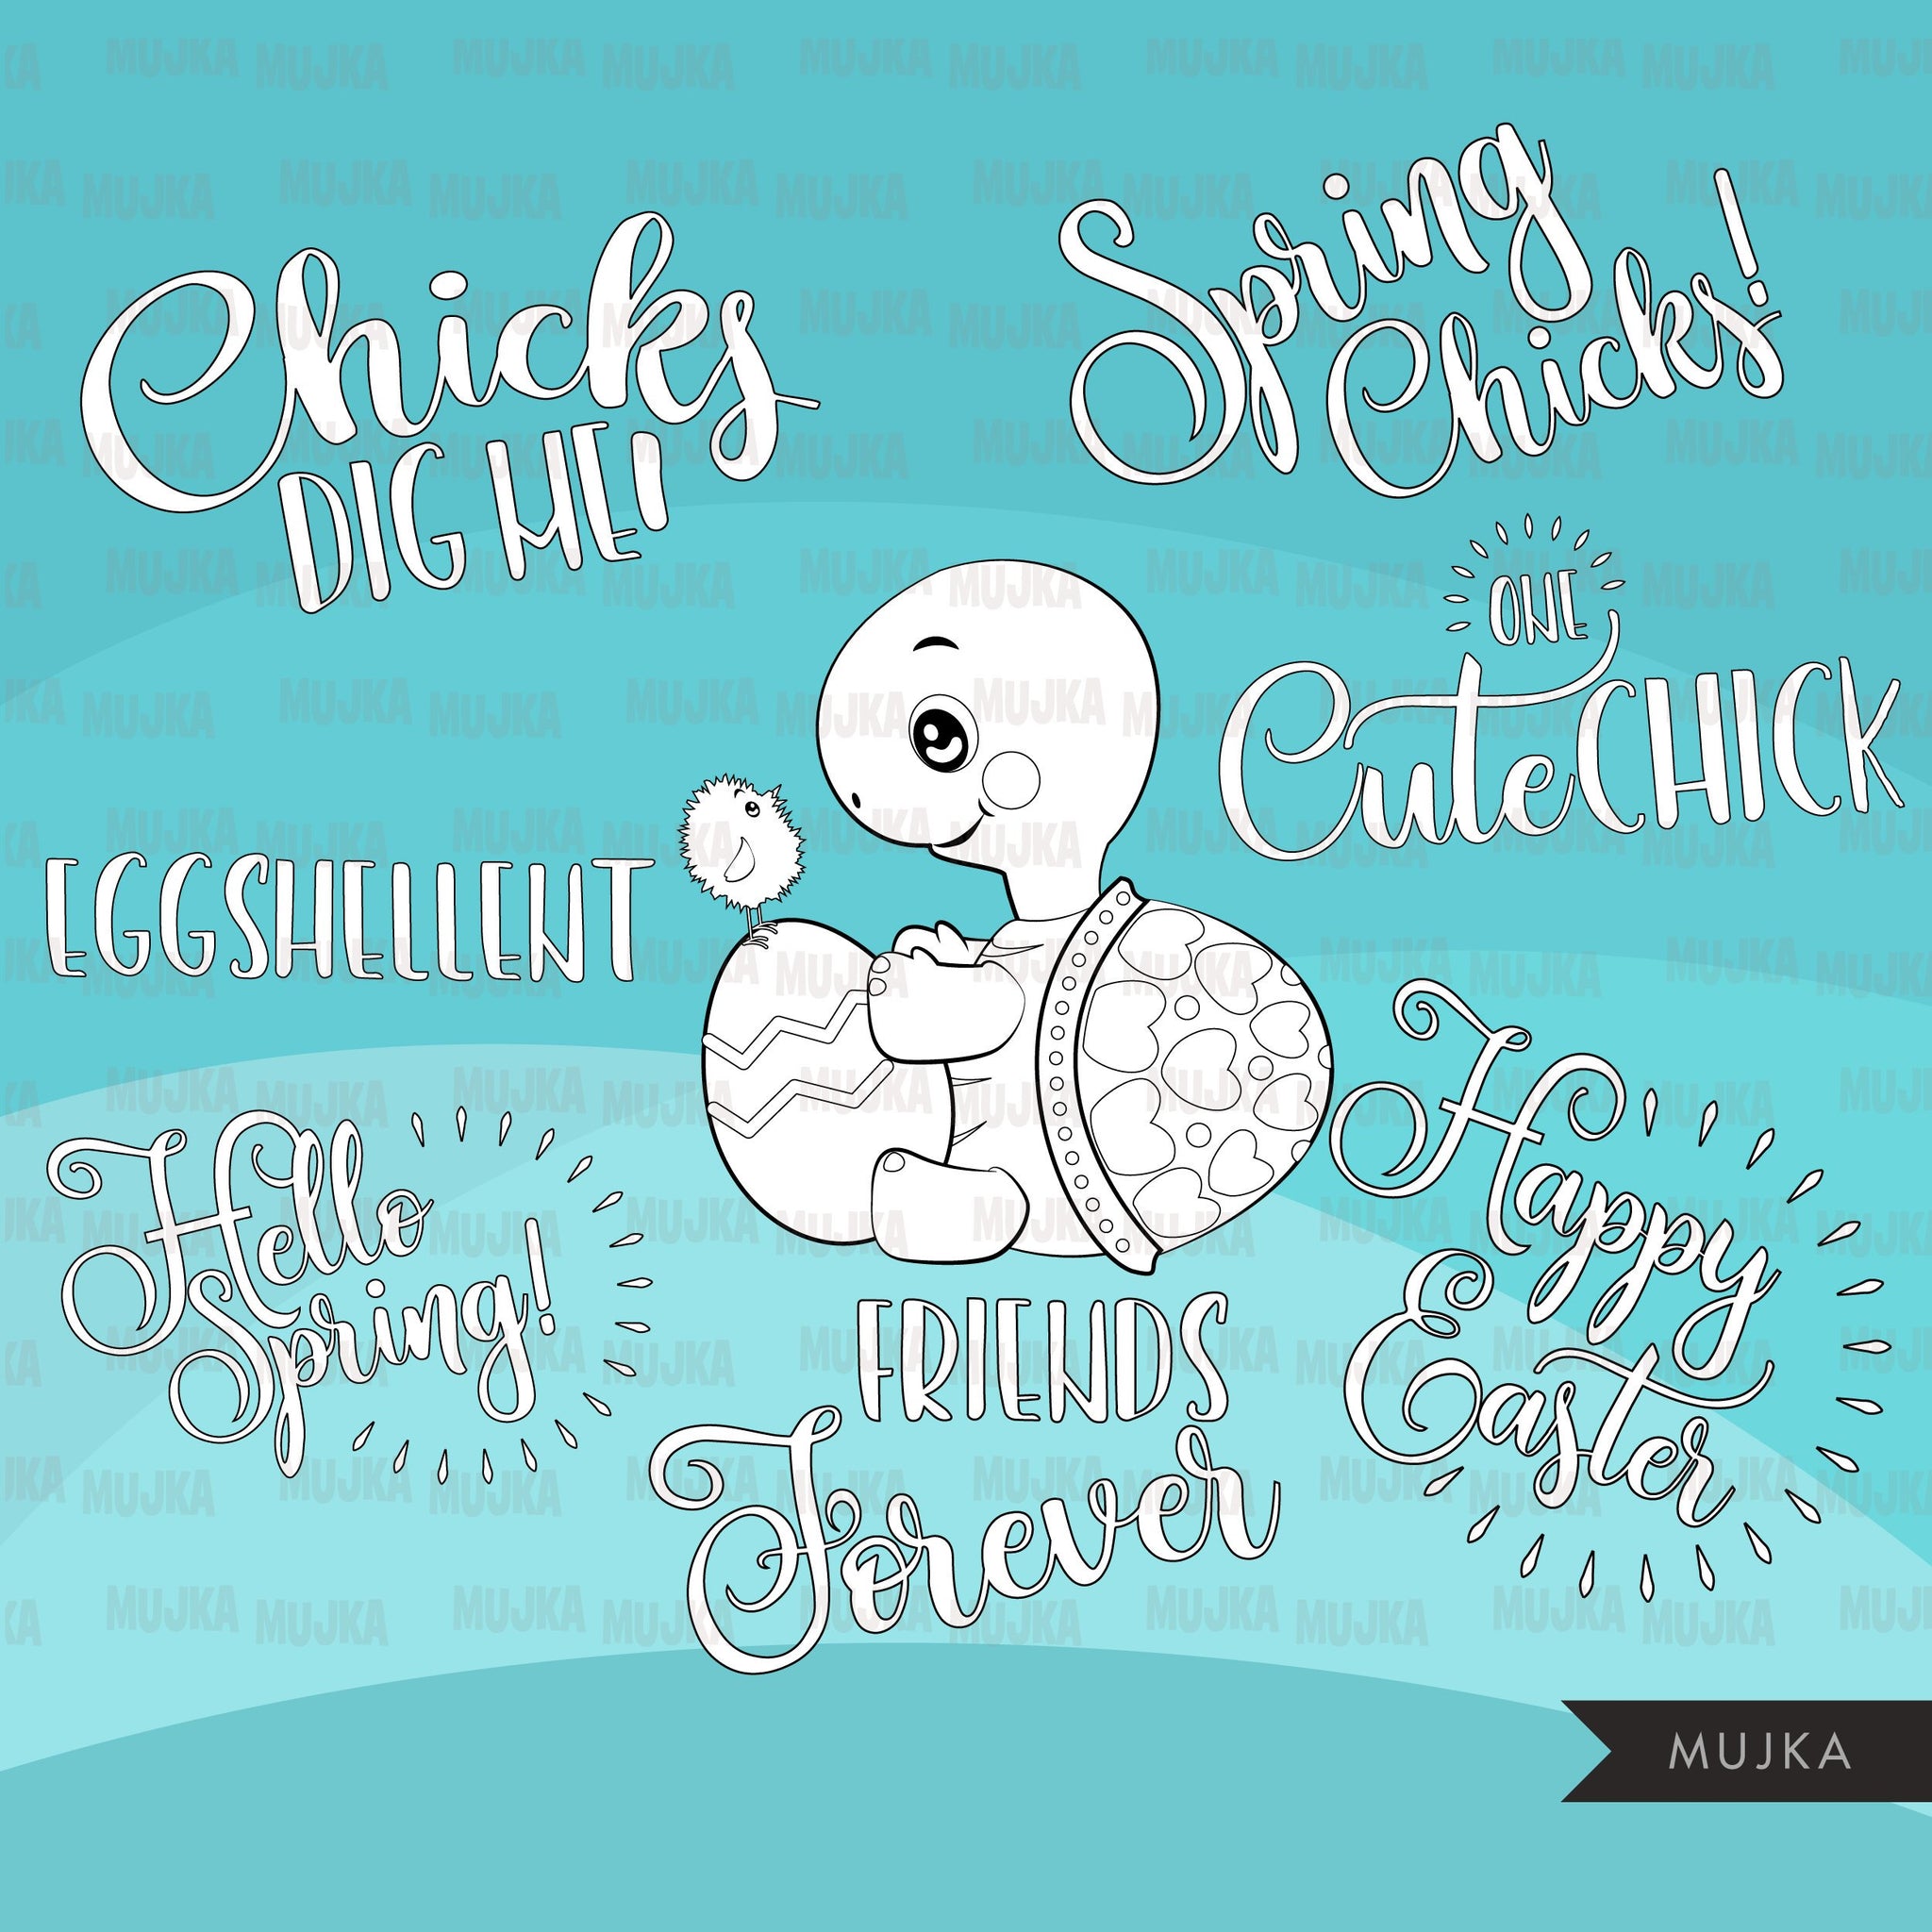 Turtles and Chicks Digital stamps, cute Easter animal graphics, coloring book black and white outline clip art